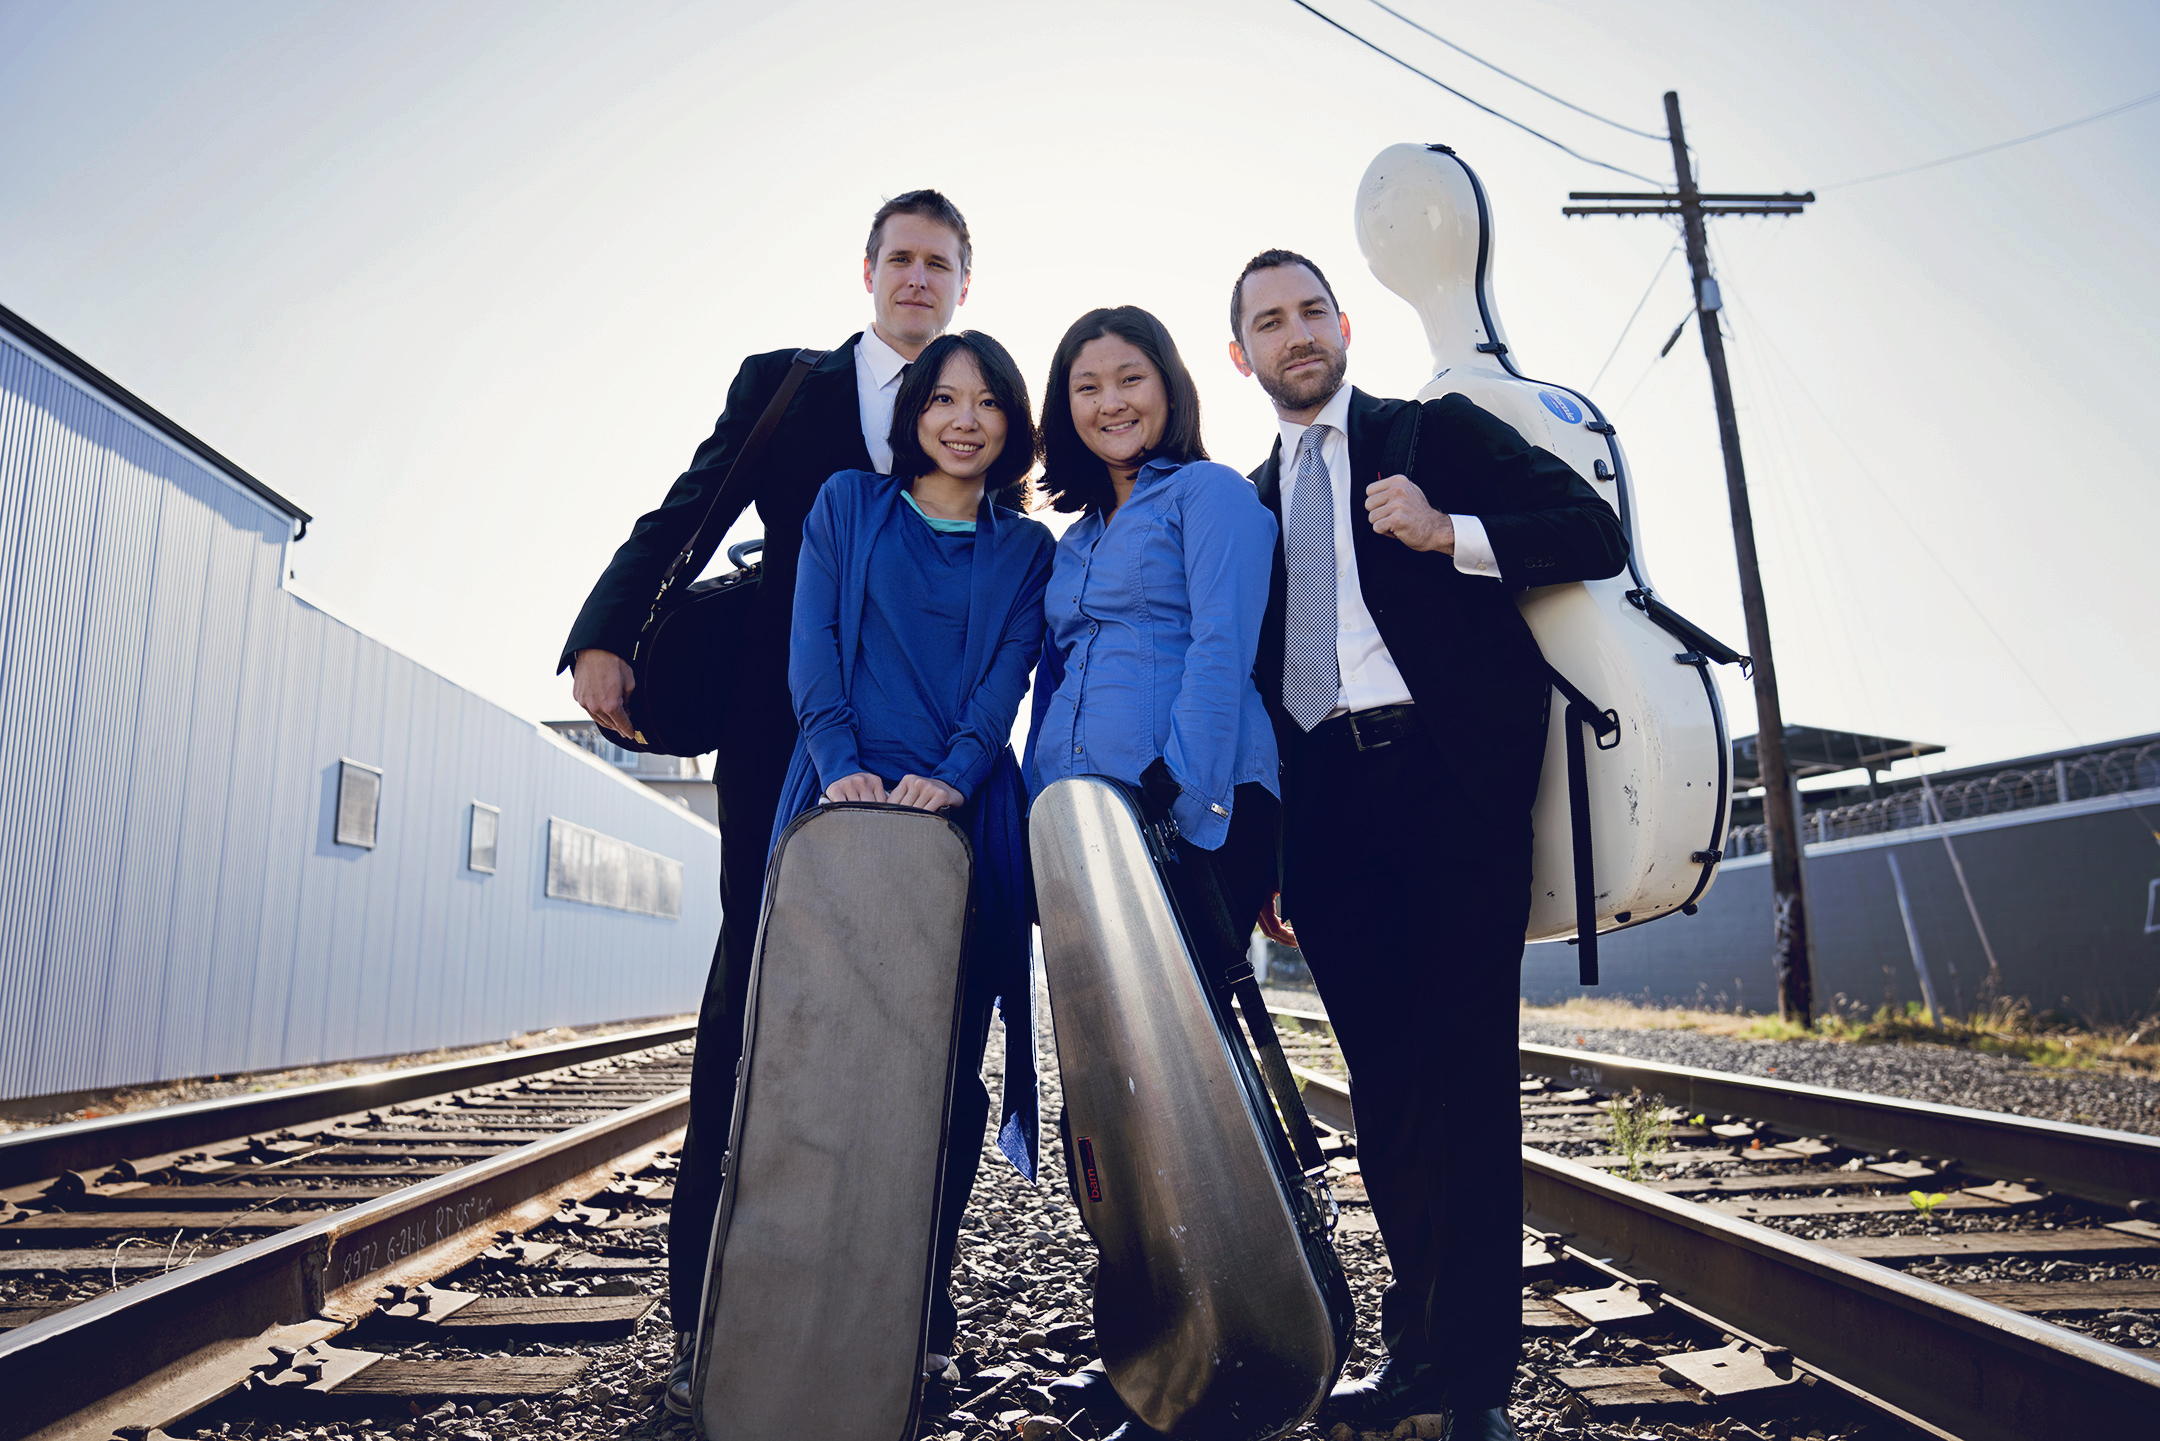 The Delgani String Quartet opens its second season with a series of “musical memoirs”